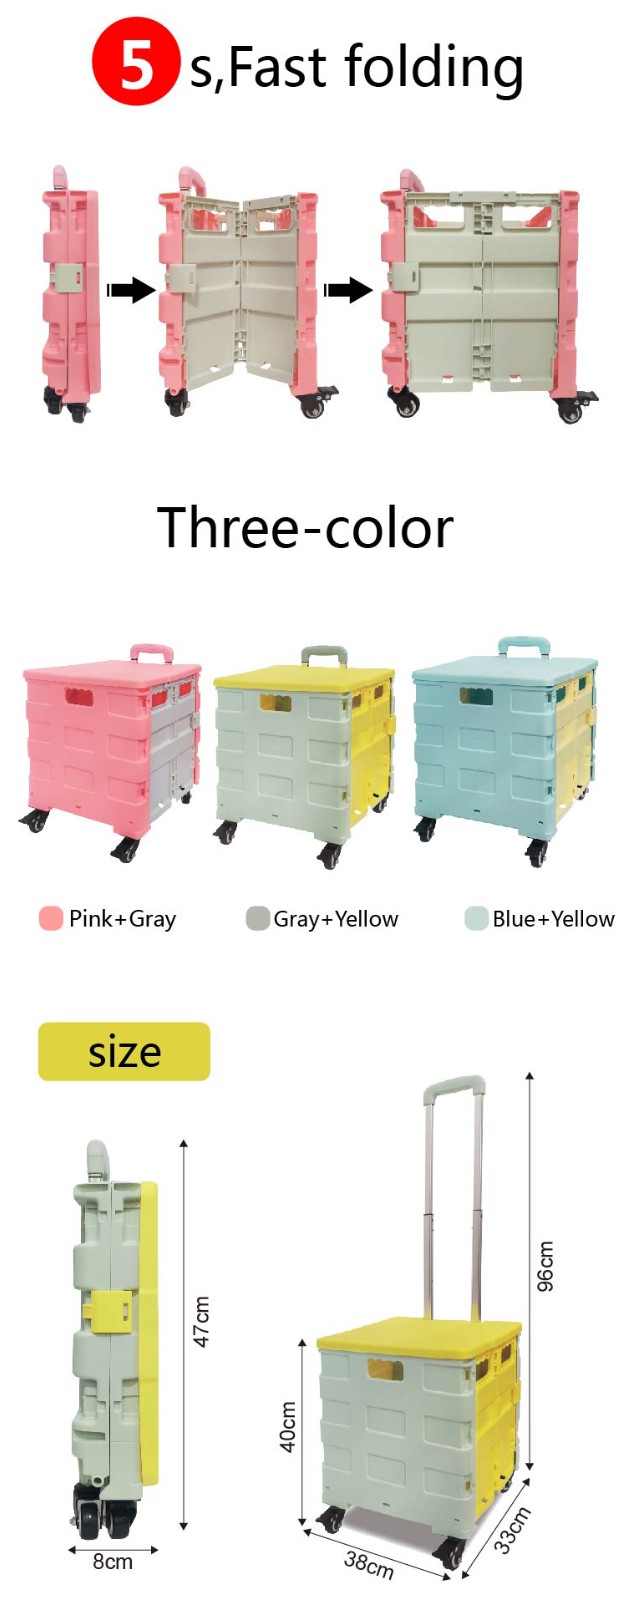 Wholesale Foldable Plastic Food Carts Folding Hand Push Grocery Shopping Trolley Cart